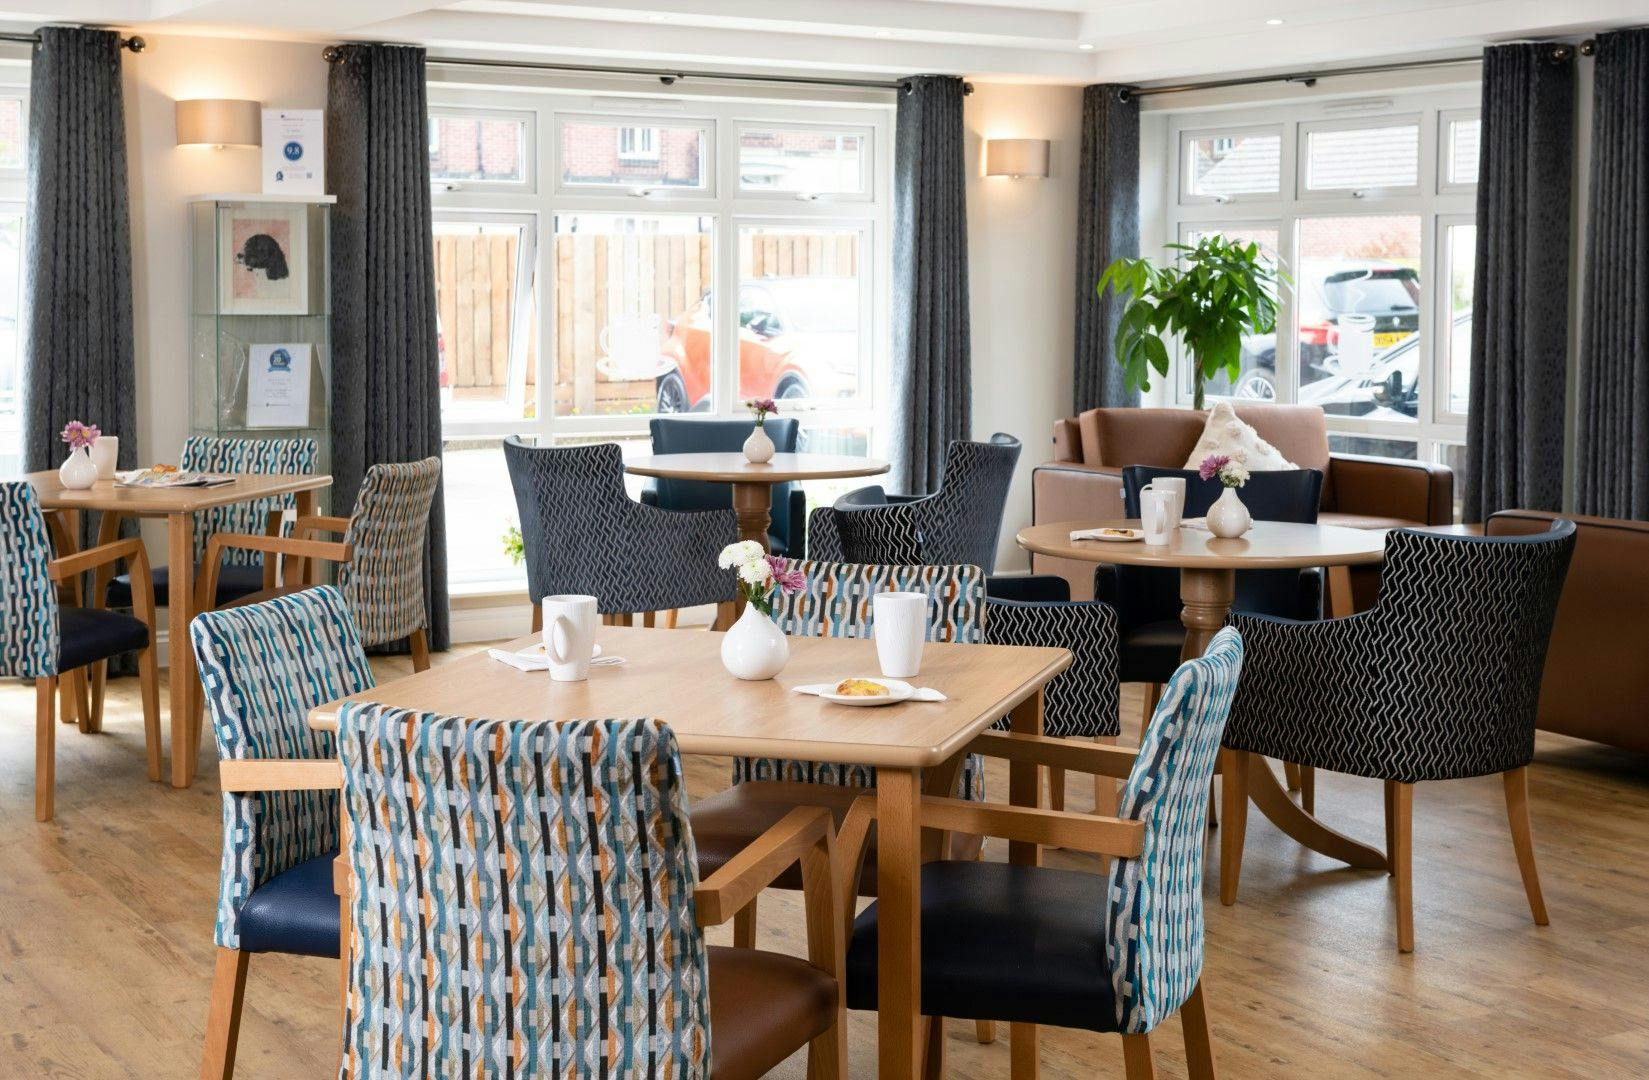 Dining Area at Ty Enfys Care Home in Cardiff, South Glamorgan